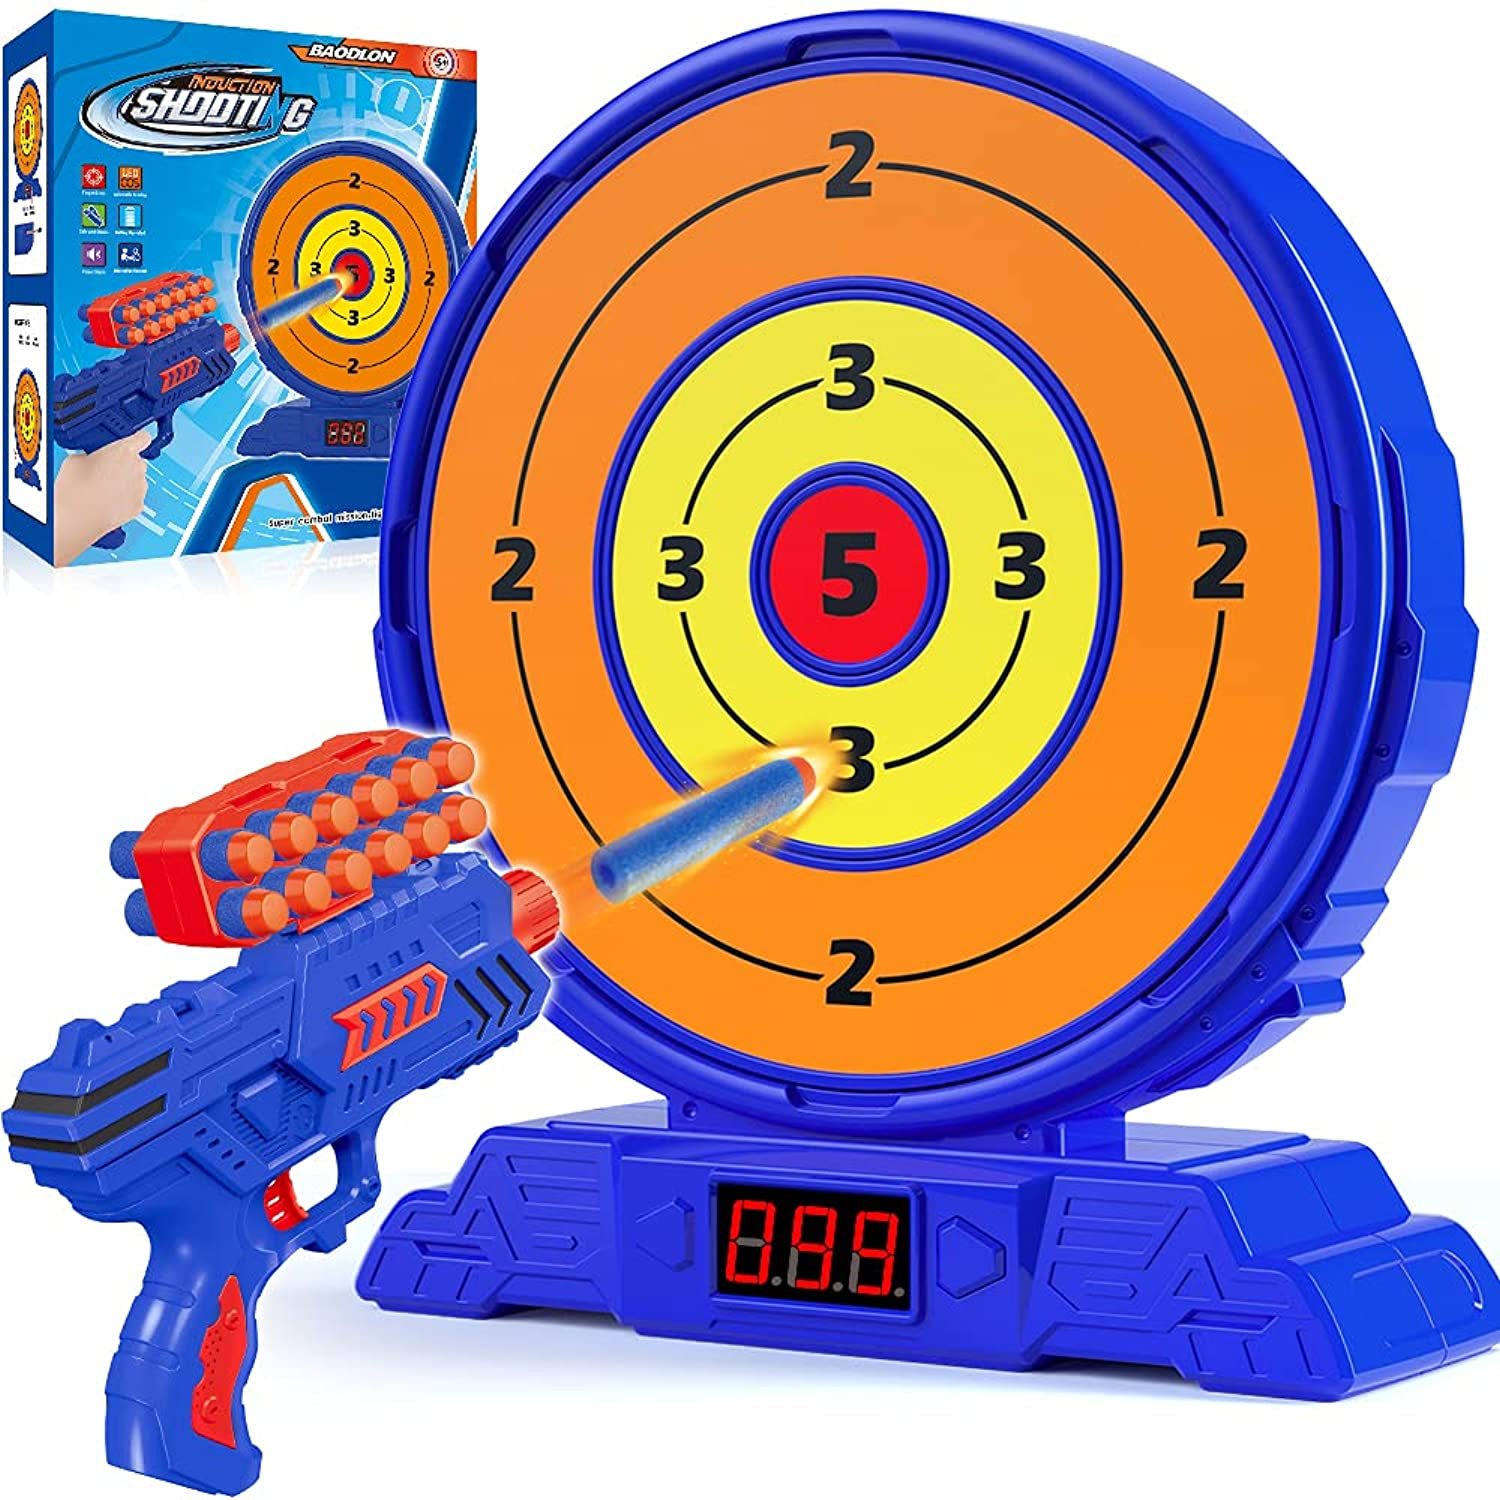 Shooting Game Toy For Age 5, 6, 7, 8, 9, 10+ Years Old Kids, Boys - Di